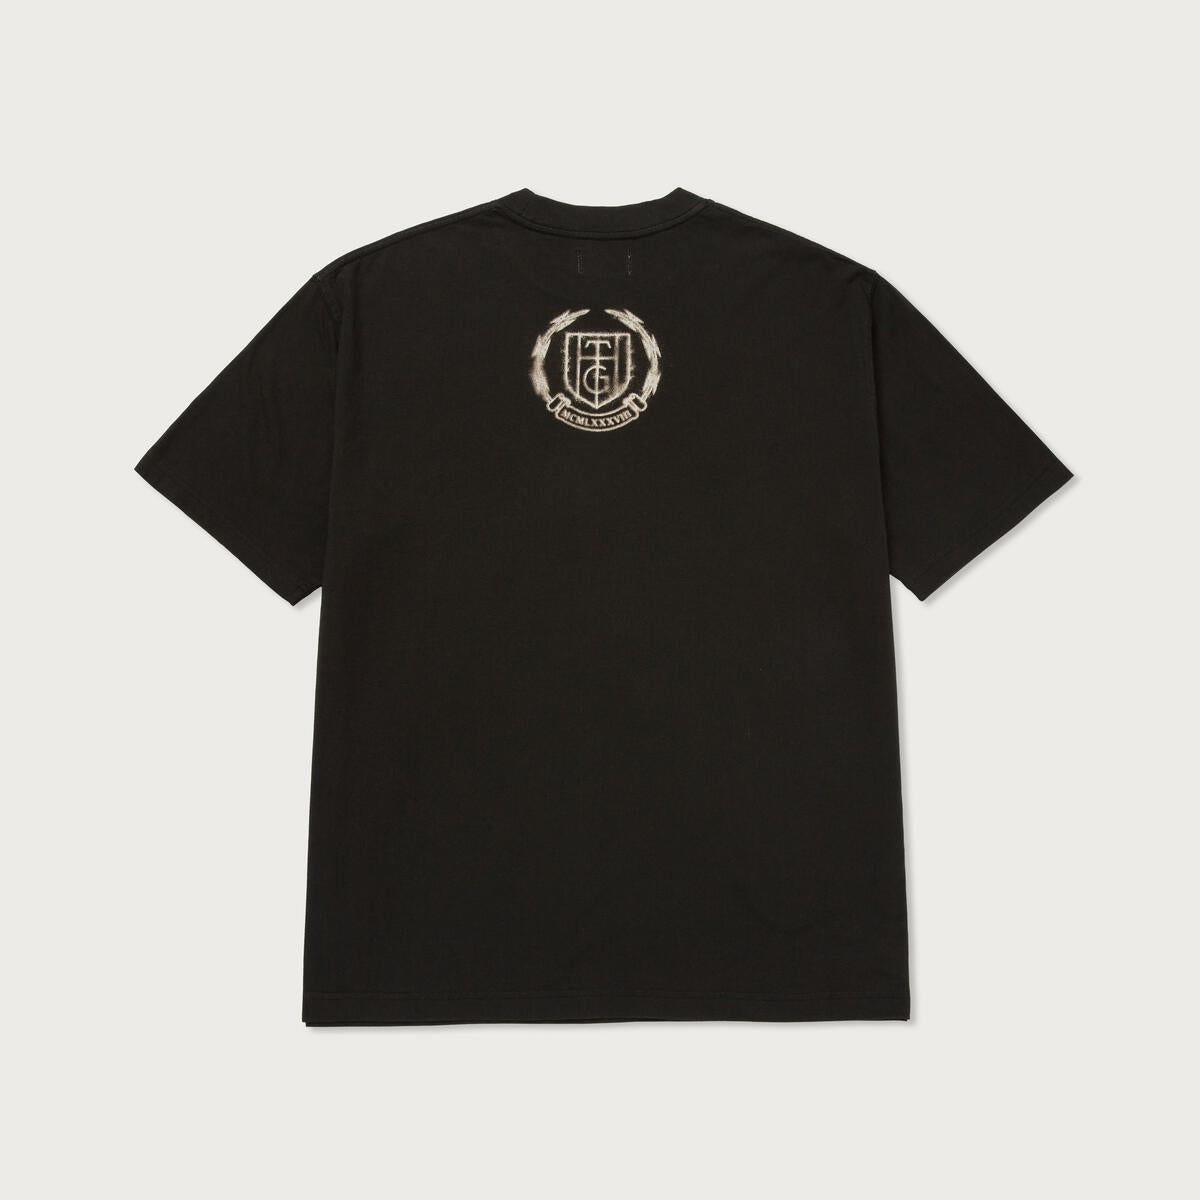 Honor The Gift C-Fall Dominos Tee Black